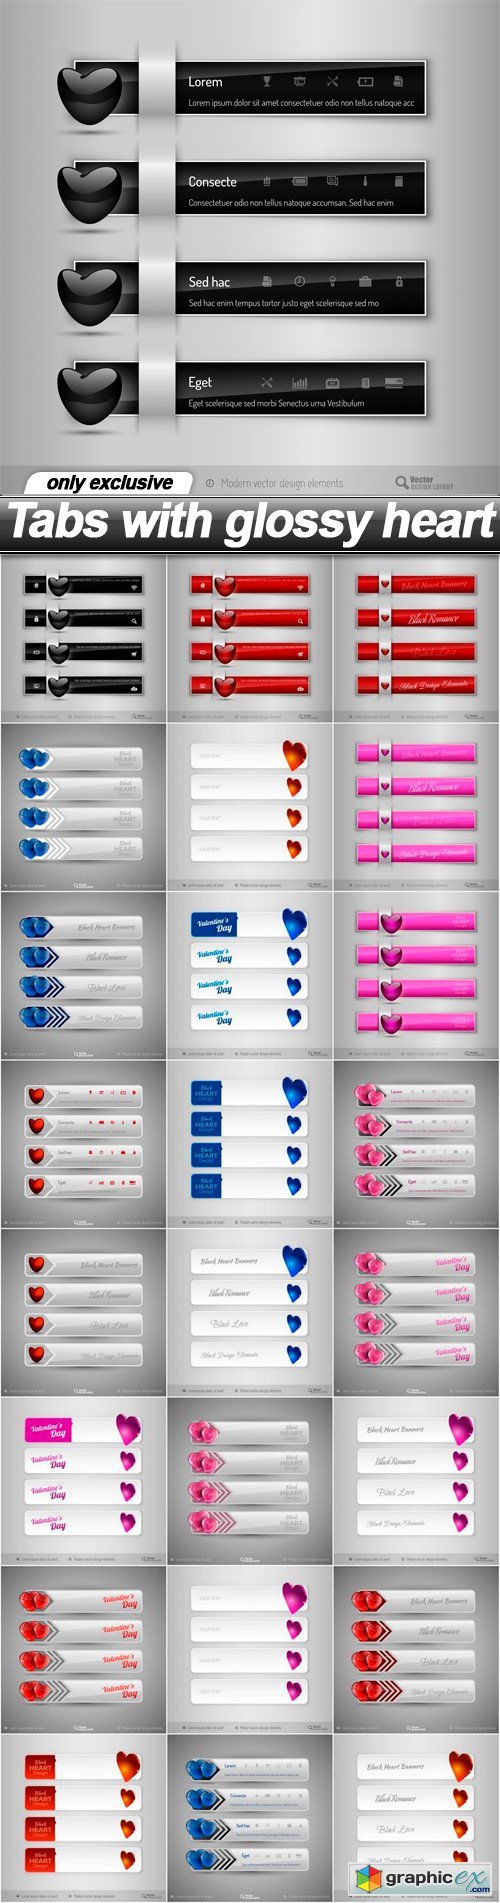 Tabs with glossy heart - 25 EPS